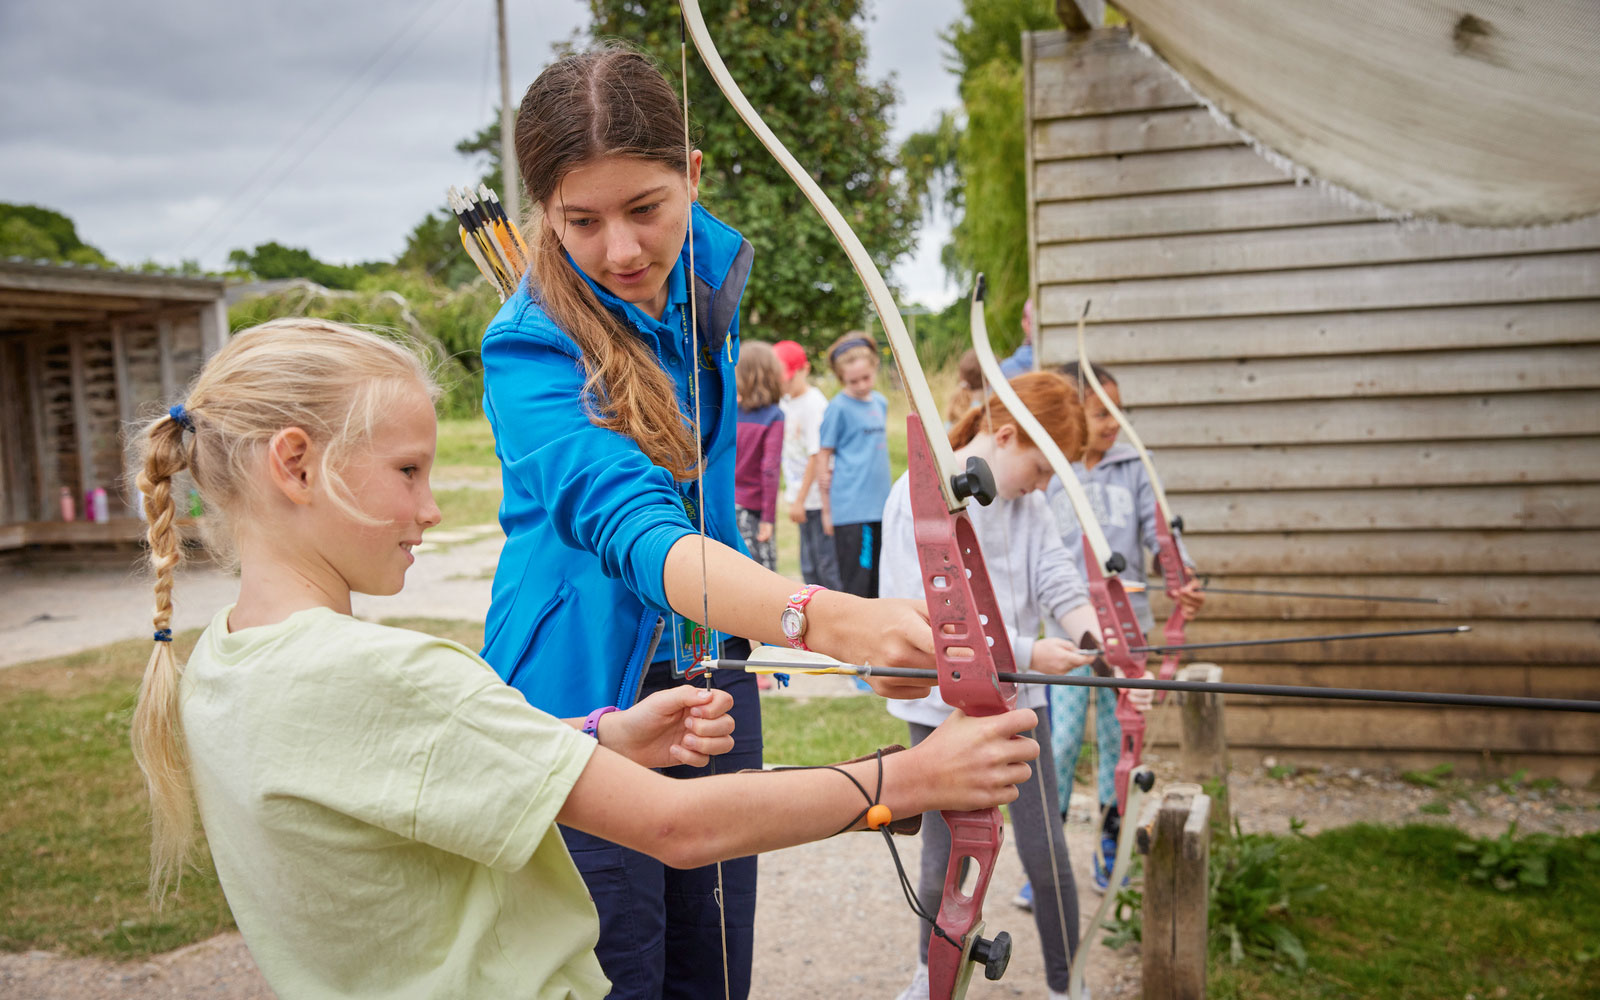 Activity Instructor teaching archery to a girl